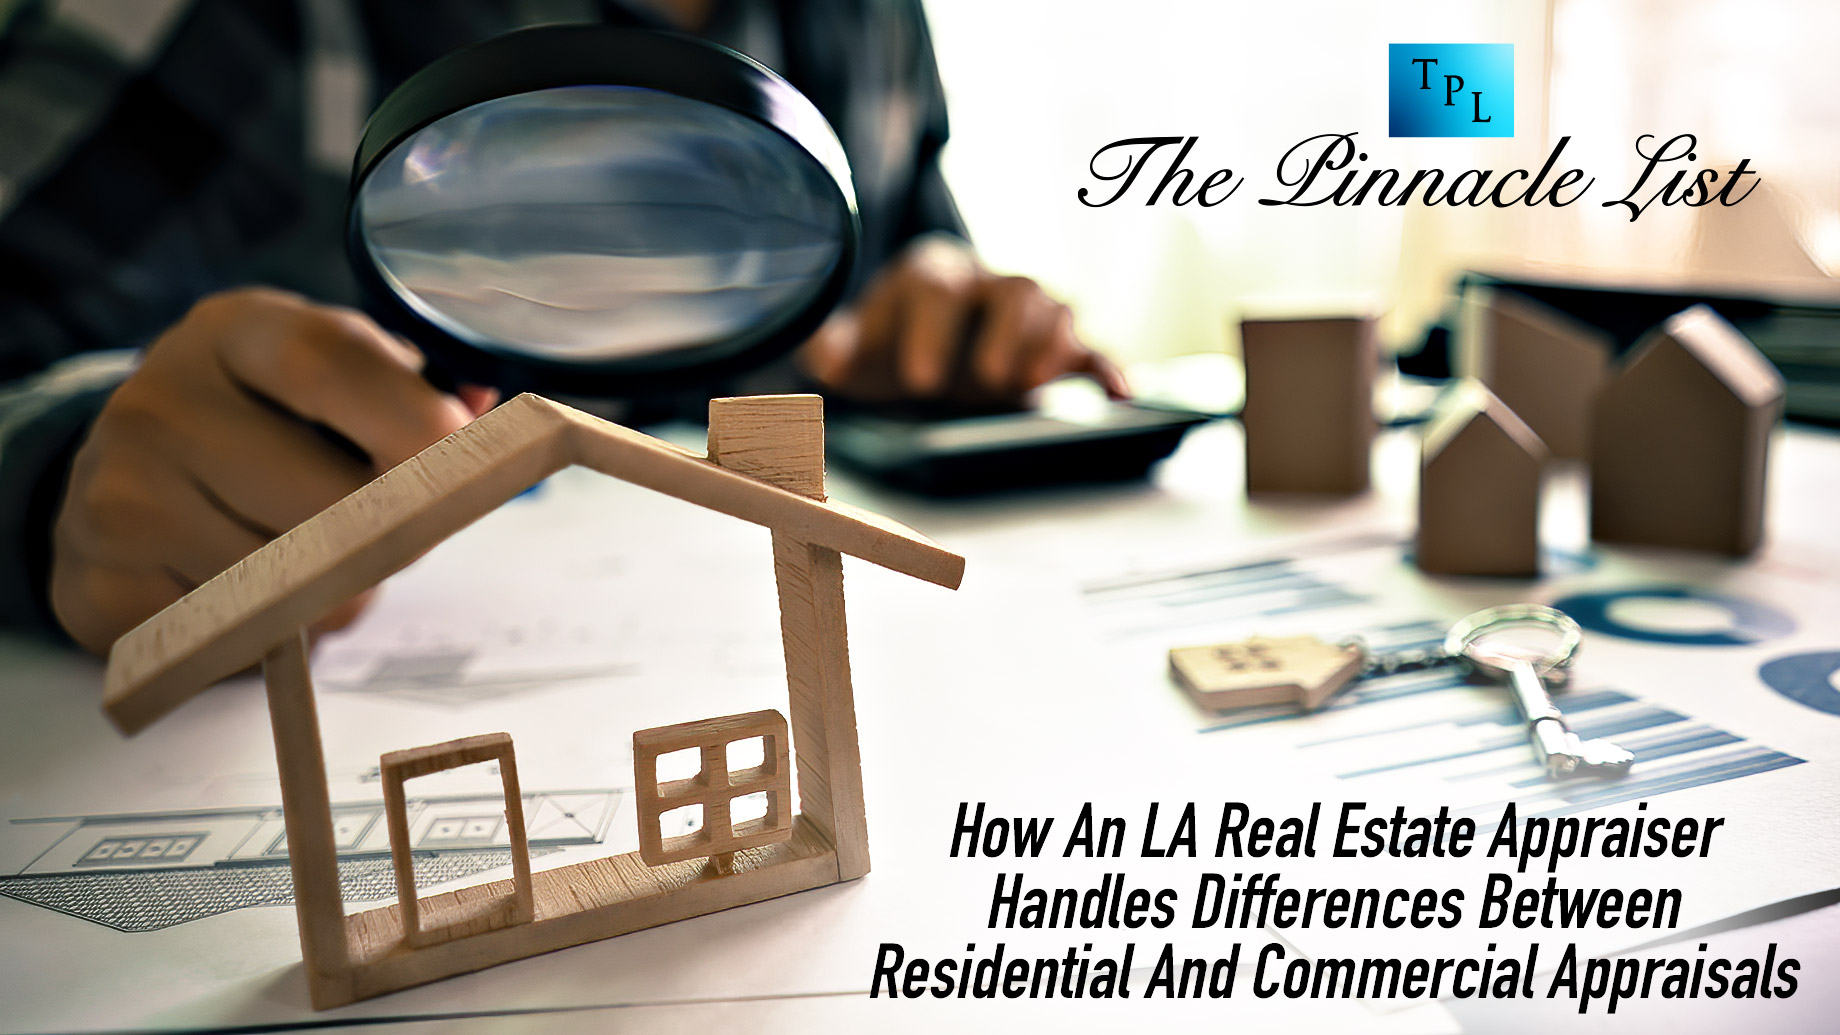 How An LA Real Estate Appraiser Handles Differences Between Residential And Commercial Appraisals